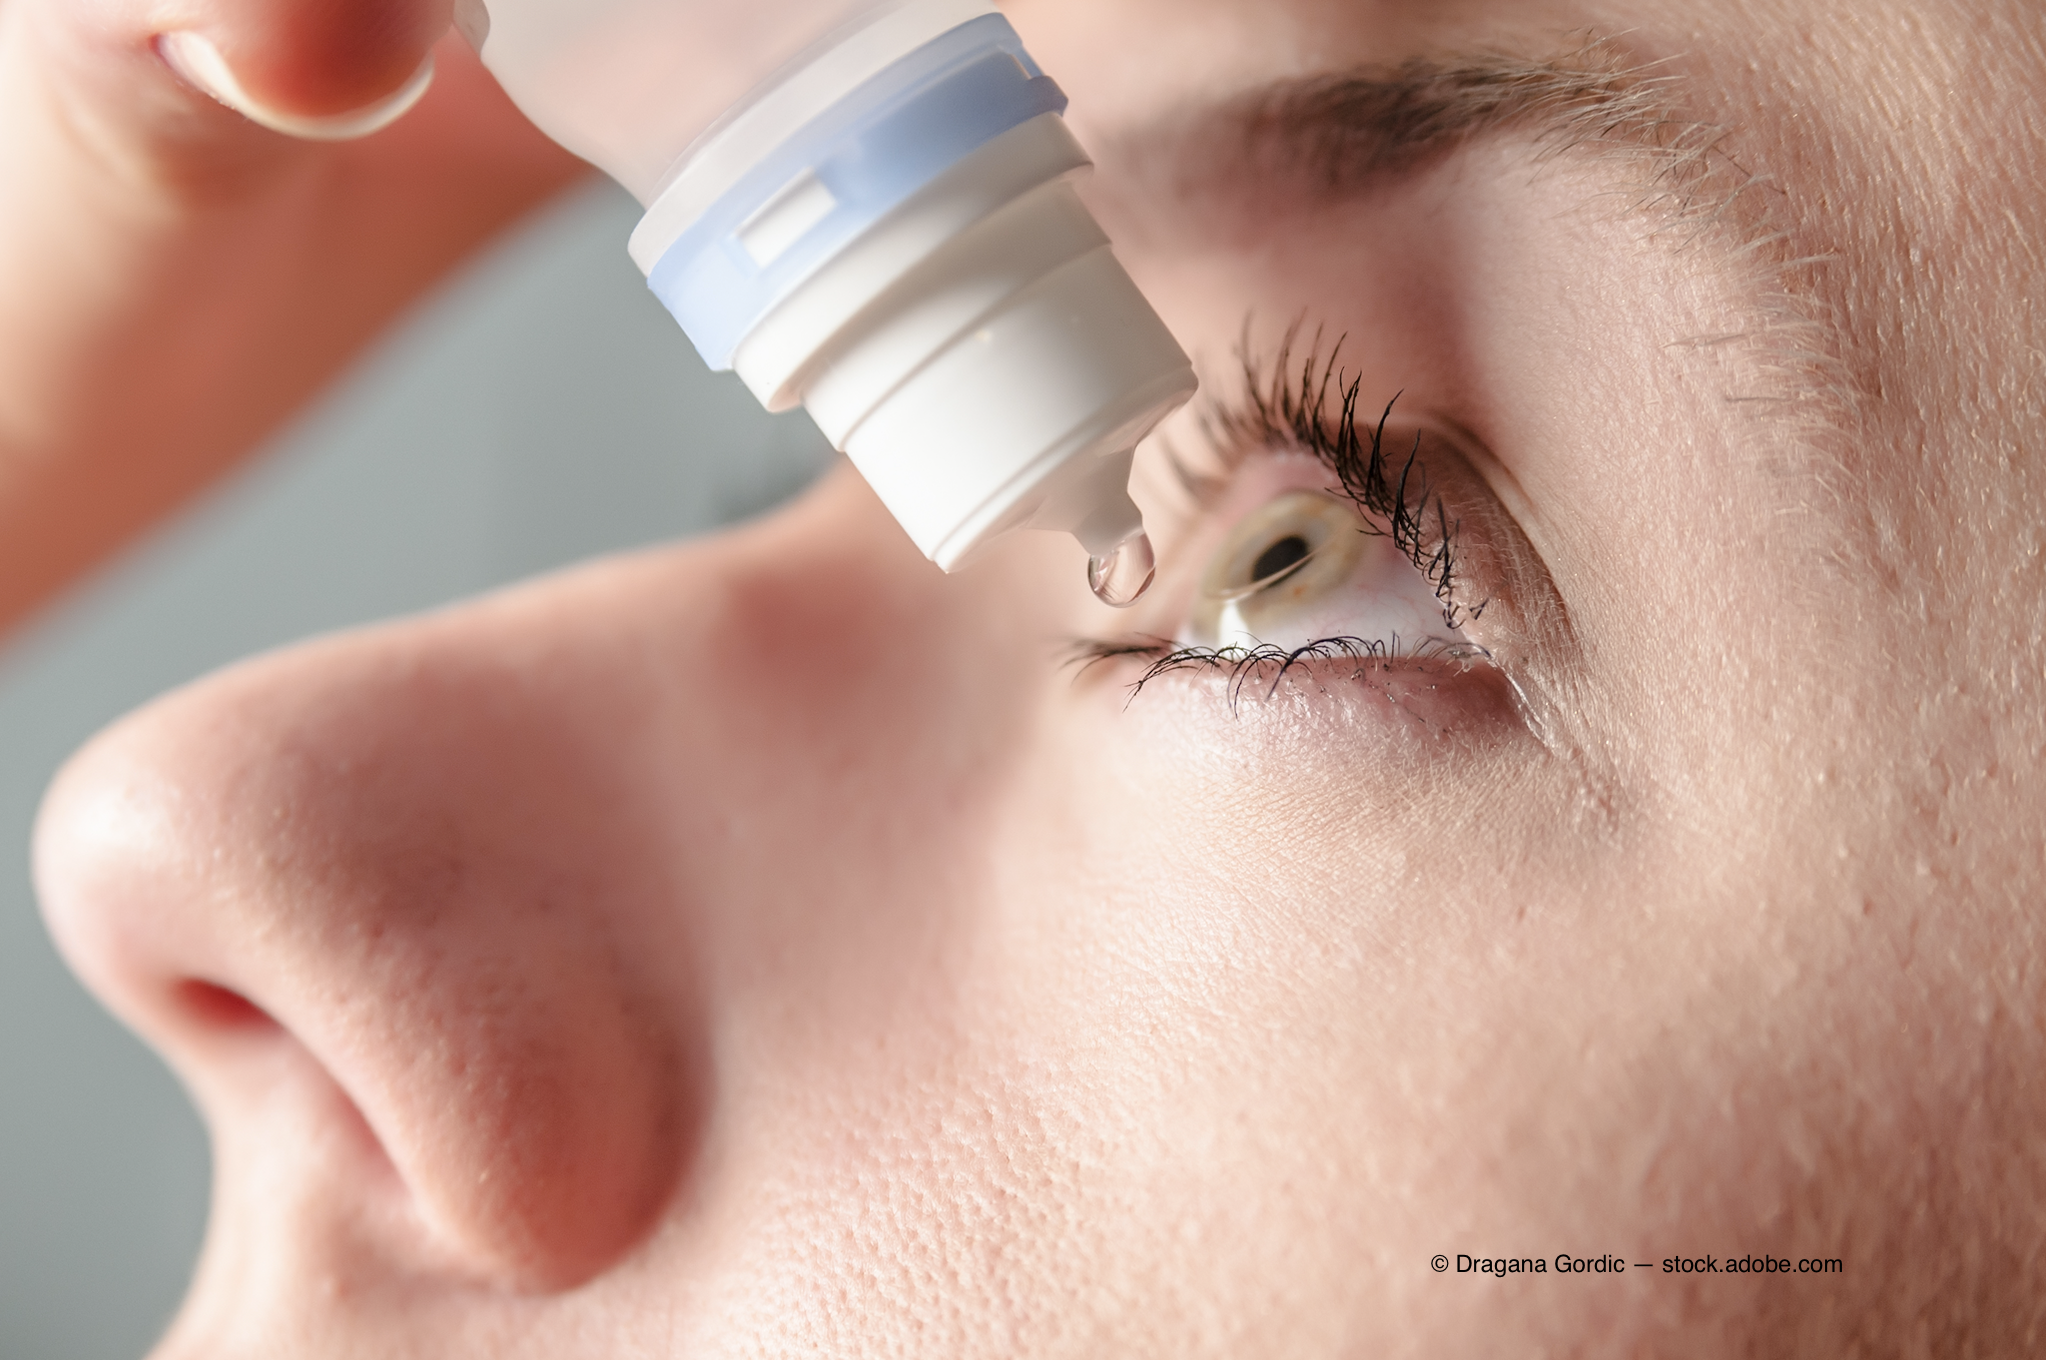 How novel autoantibodies may improve screening dry eye patients for Sjogren's syndrome